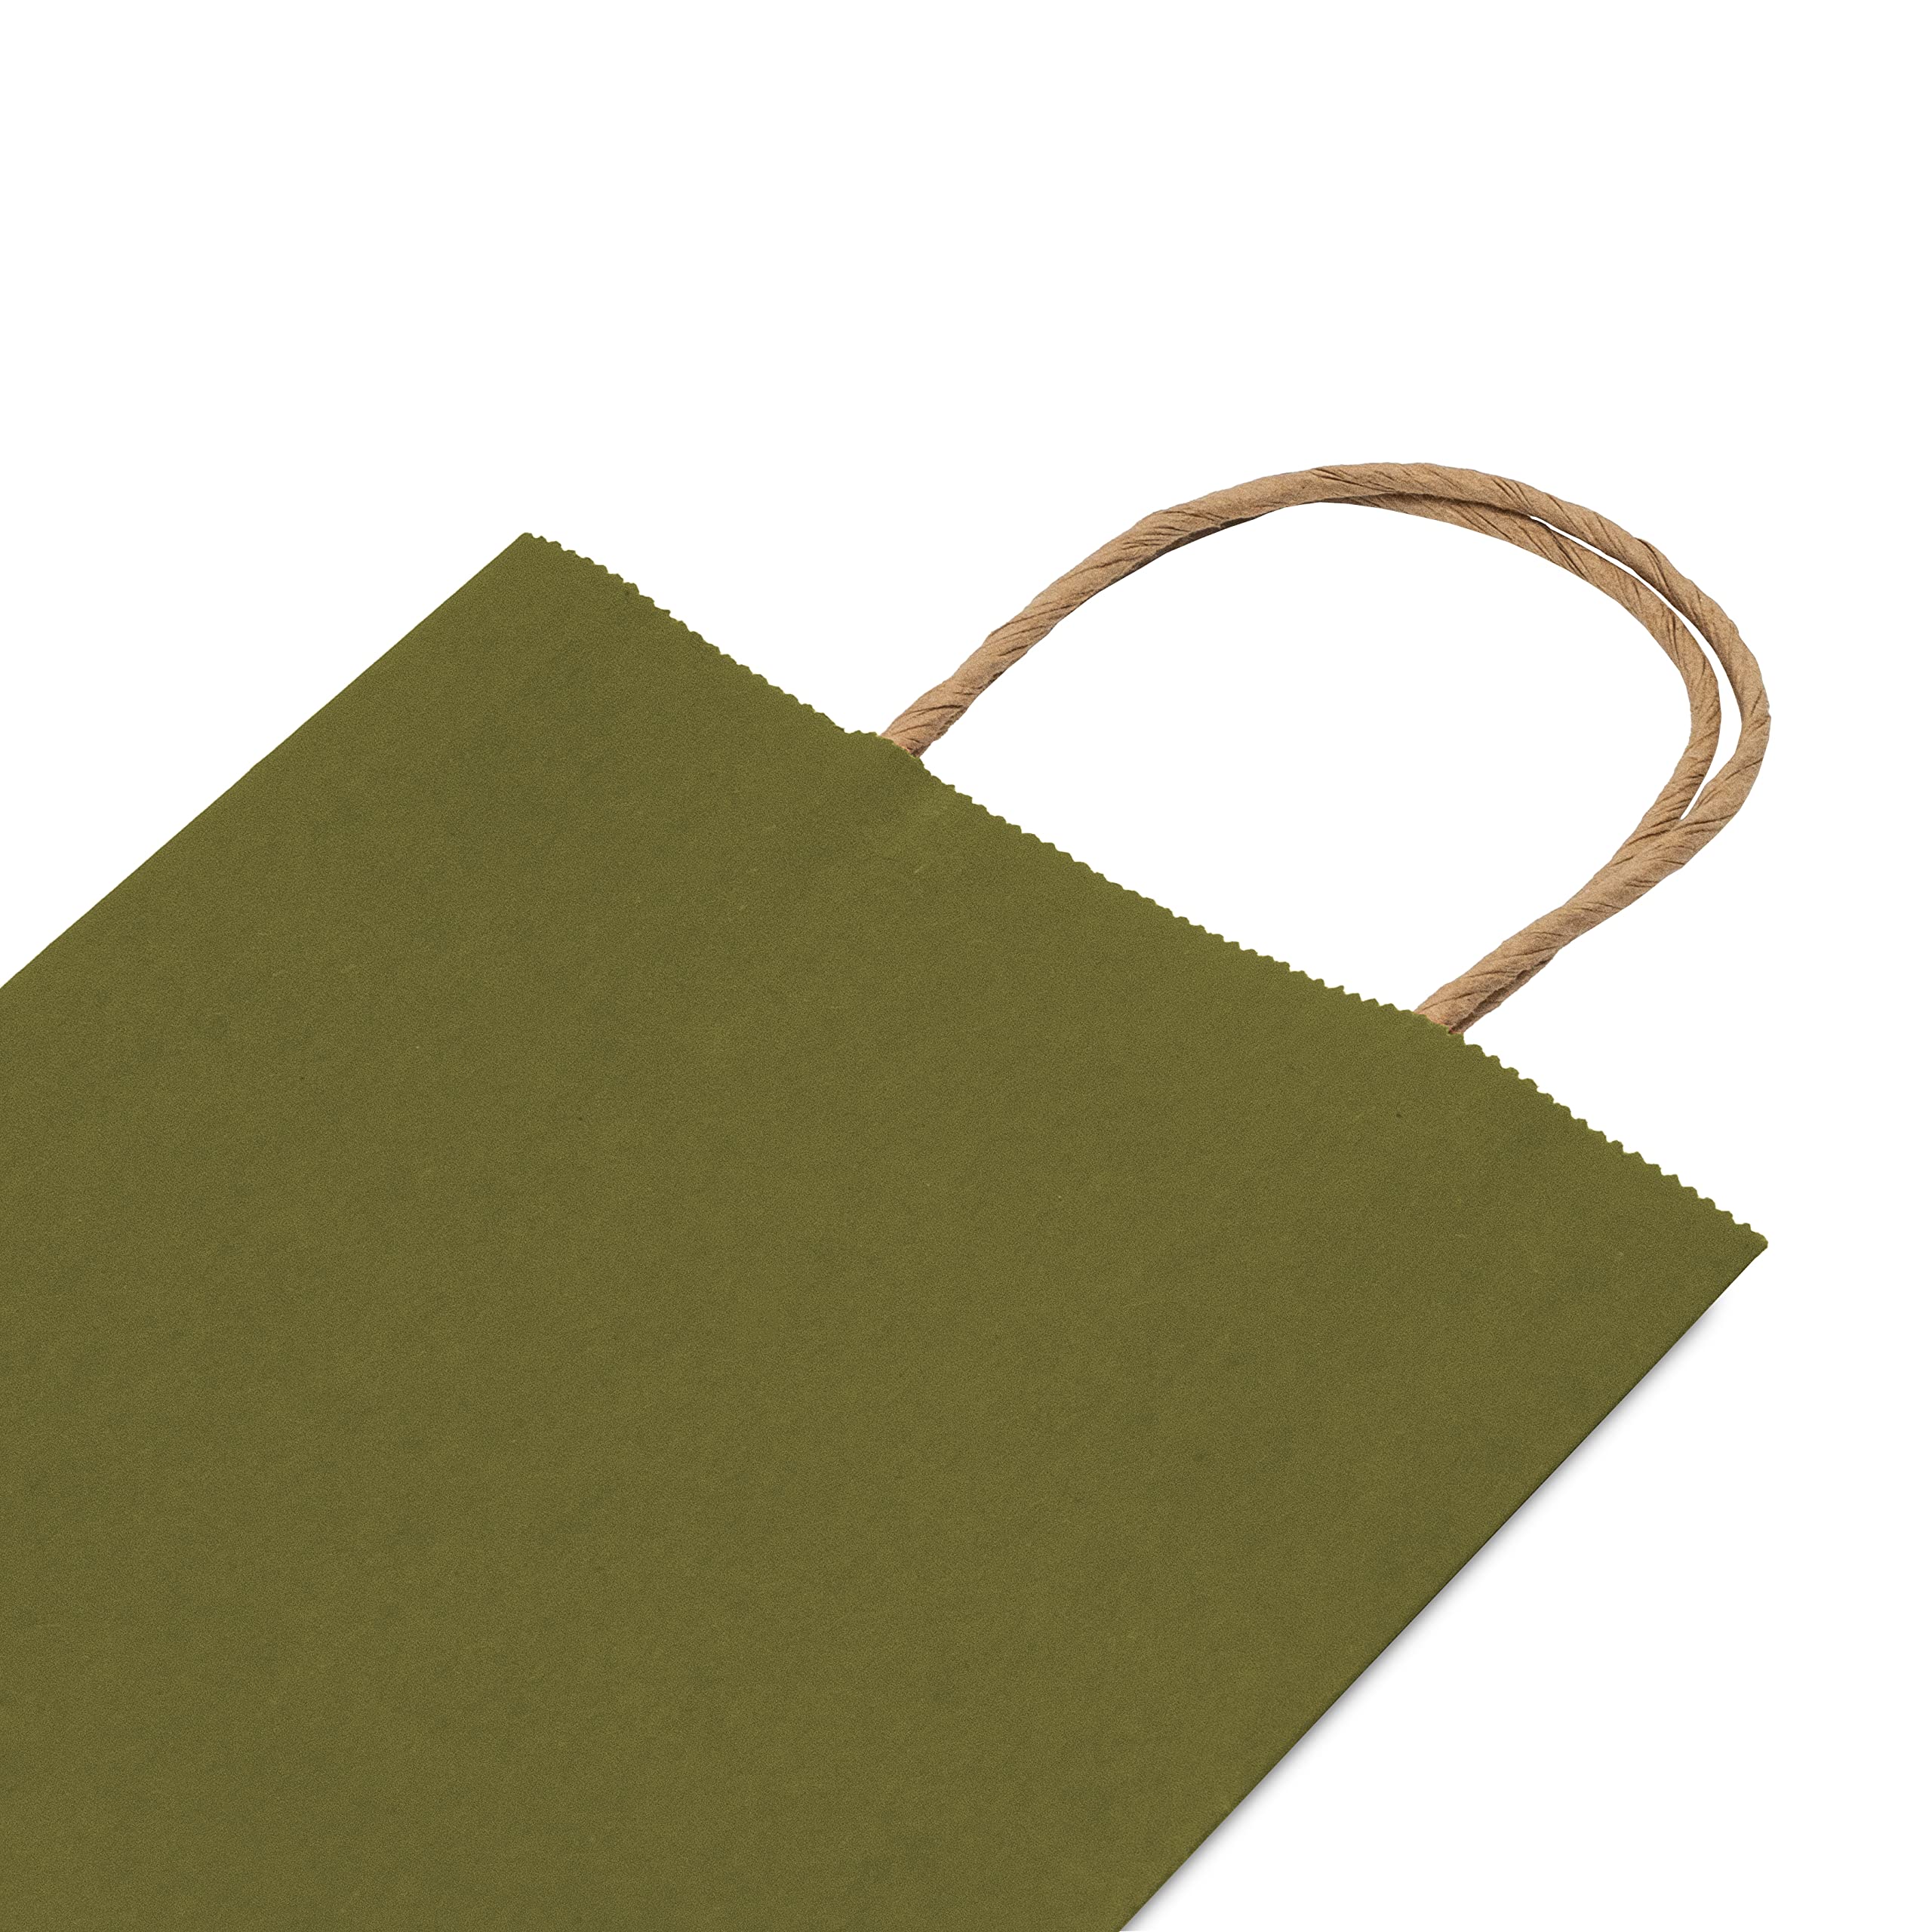 Green Gift Bags – 6X3X9 50 Pack Small Kraft Shopping Bags with Handles, Olive Green Craft Paper Euro Tote Bags for Boutique, Retail, Wedding Guests, Grocery, Birthday, Small Business, Bulk